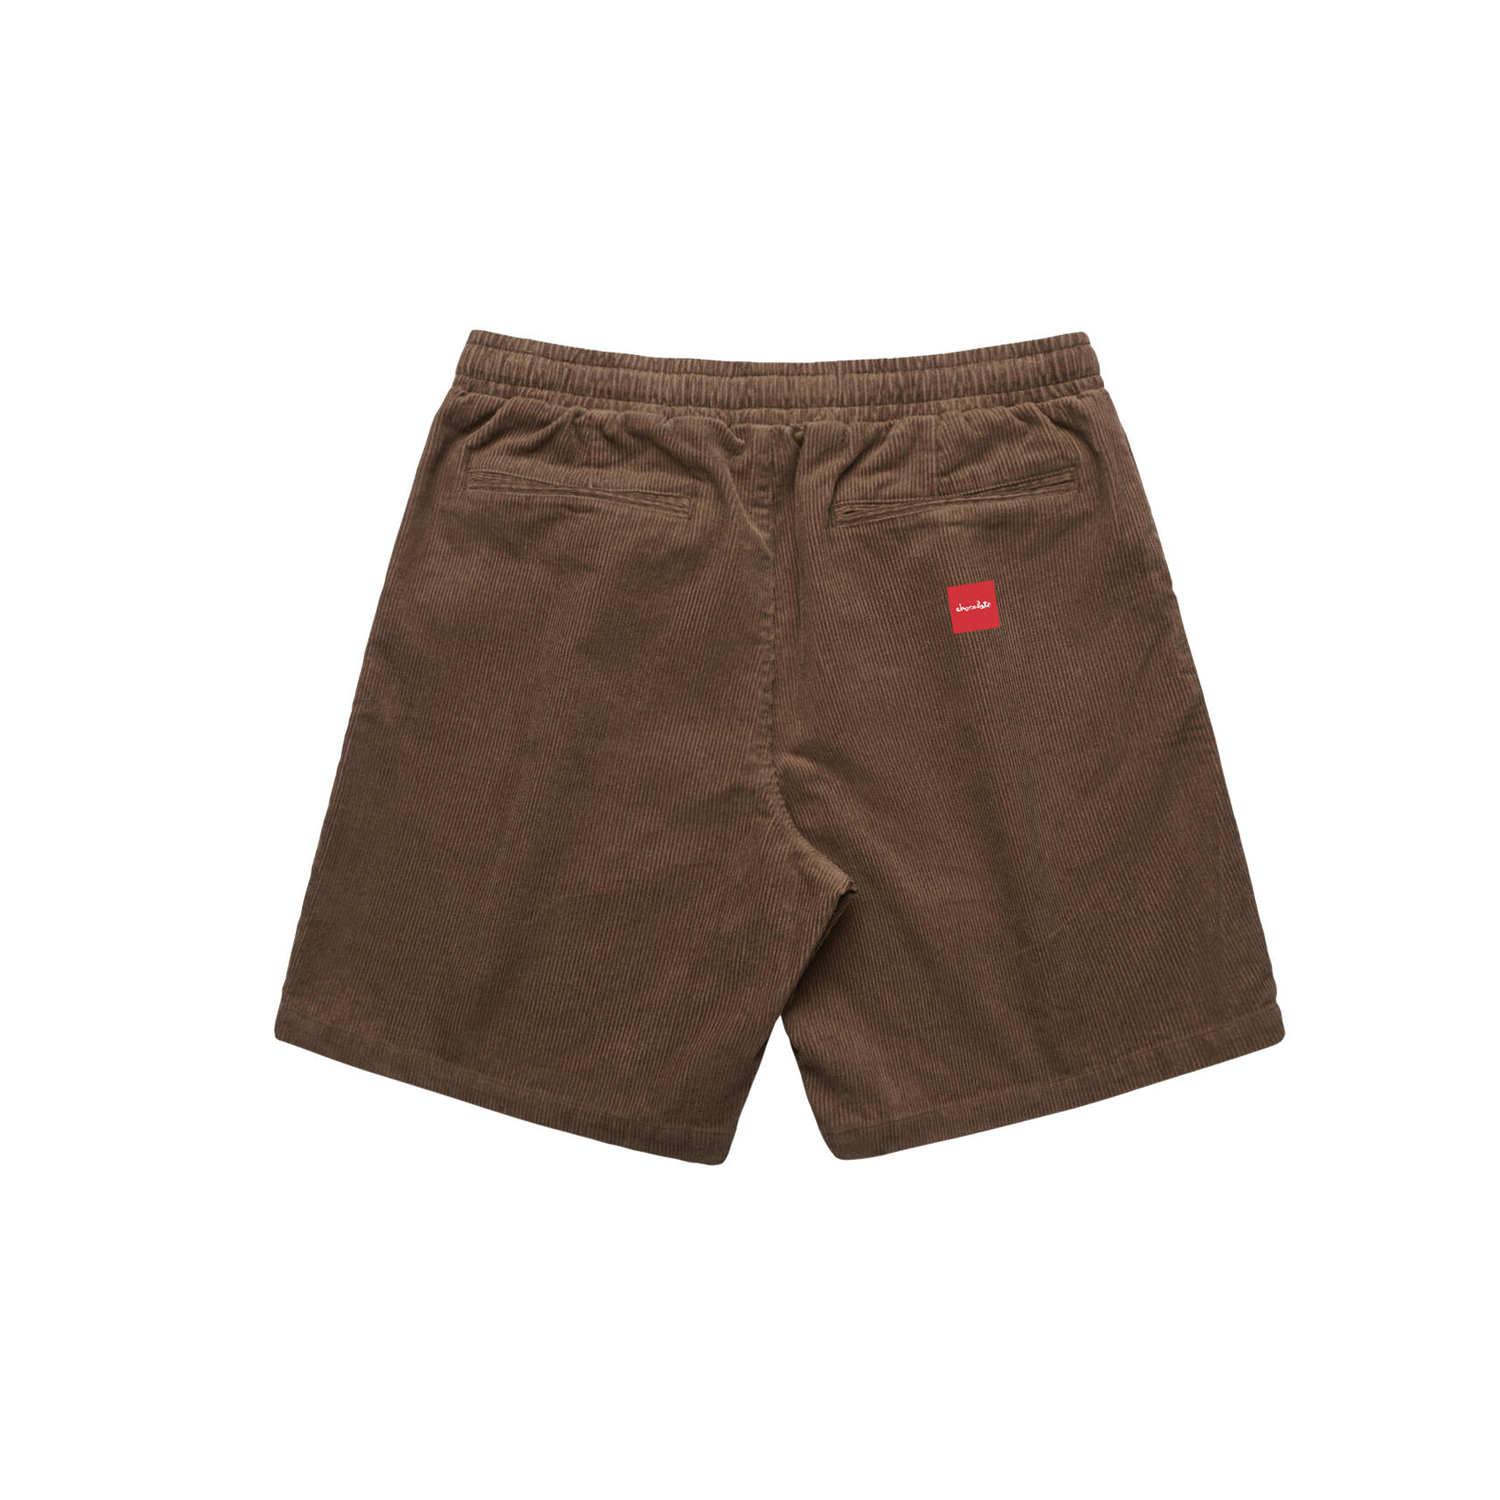 CHOCOLATE SKATEBOARDS - CORD SHORTS - BROWN